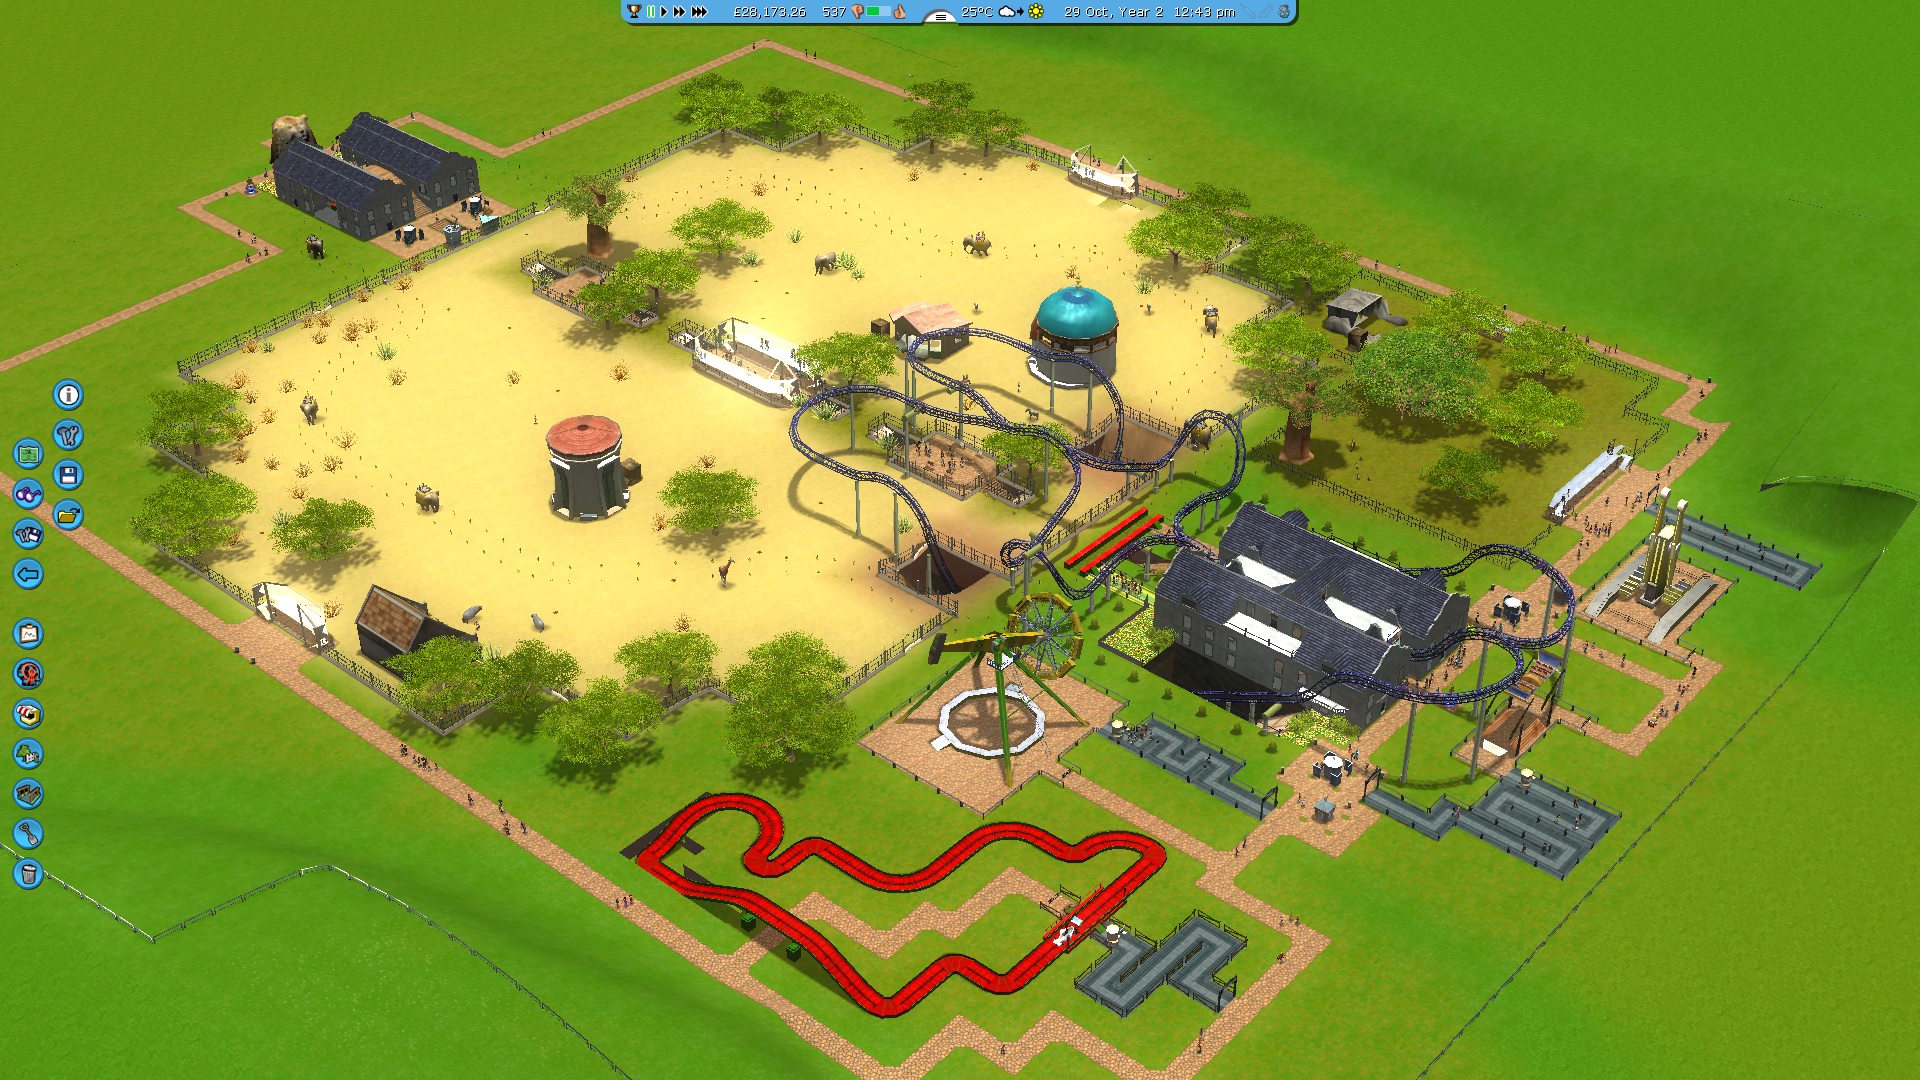 Rollercoaster Tycoon 3. Rollercoaster Tycoon 3: Platinum. Device tycoon 3.3 0